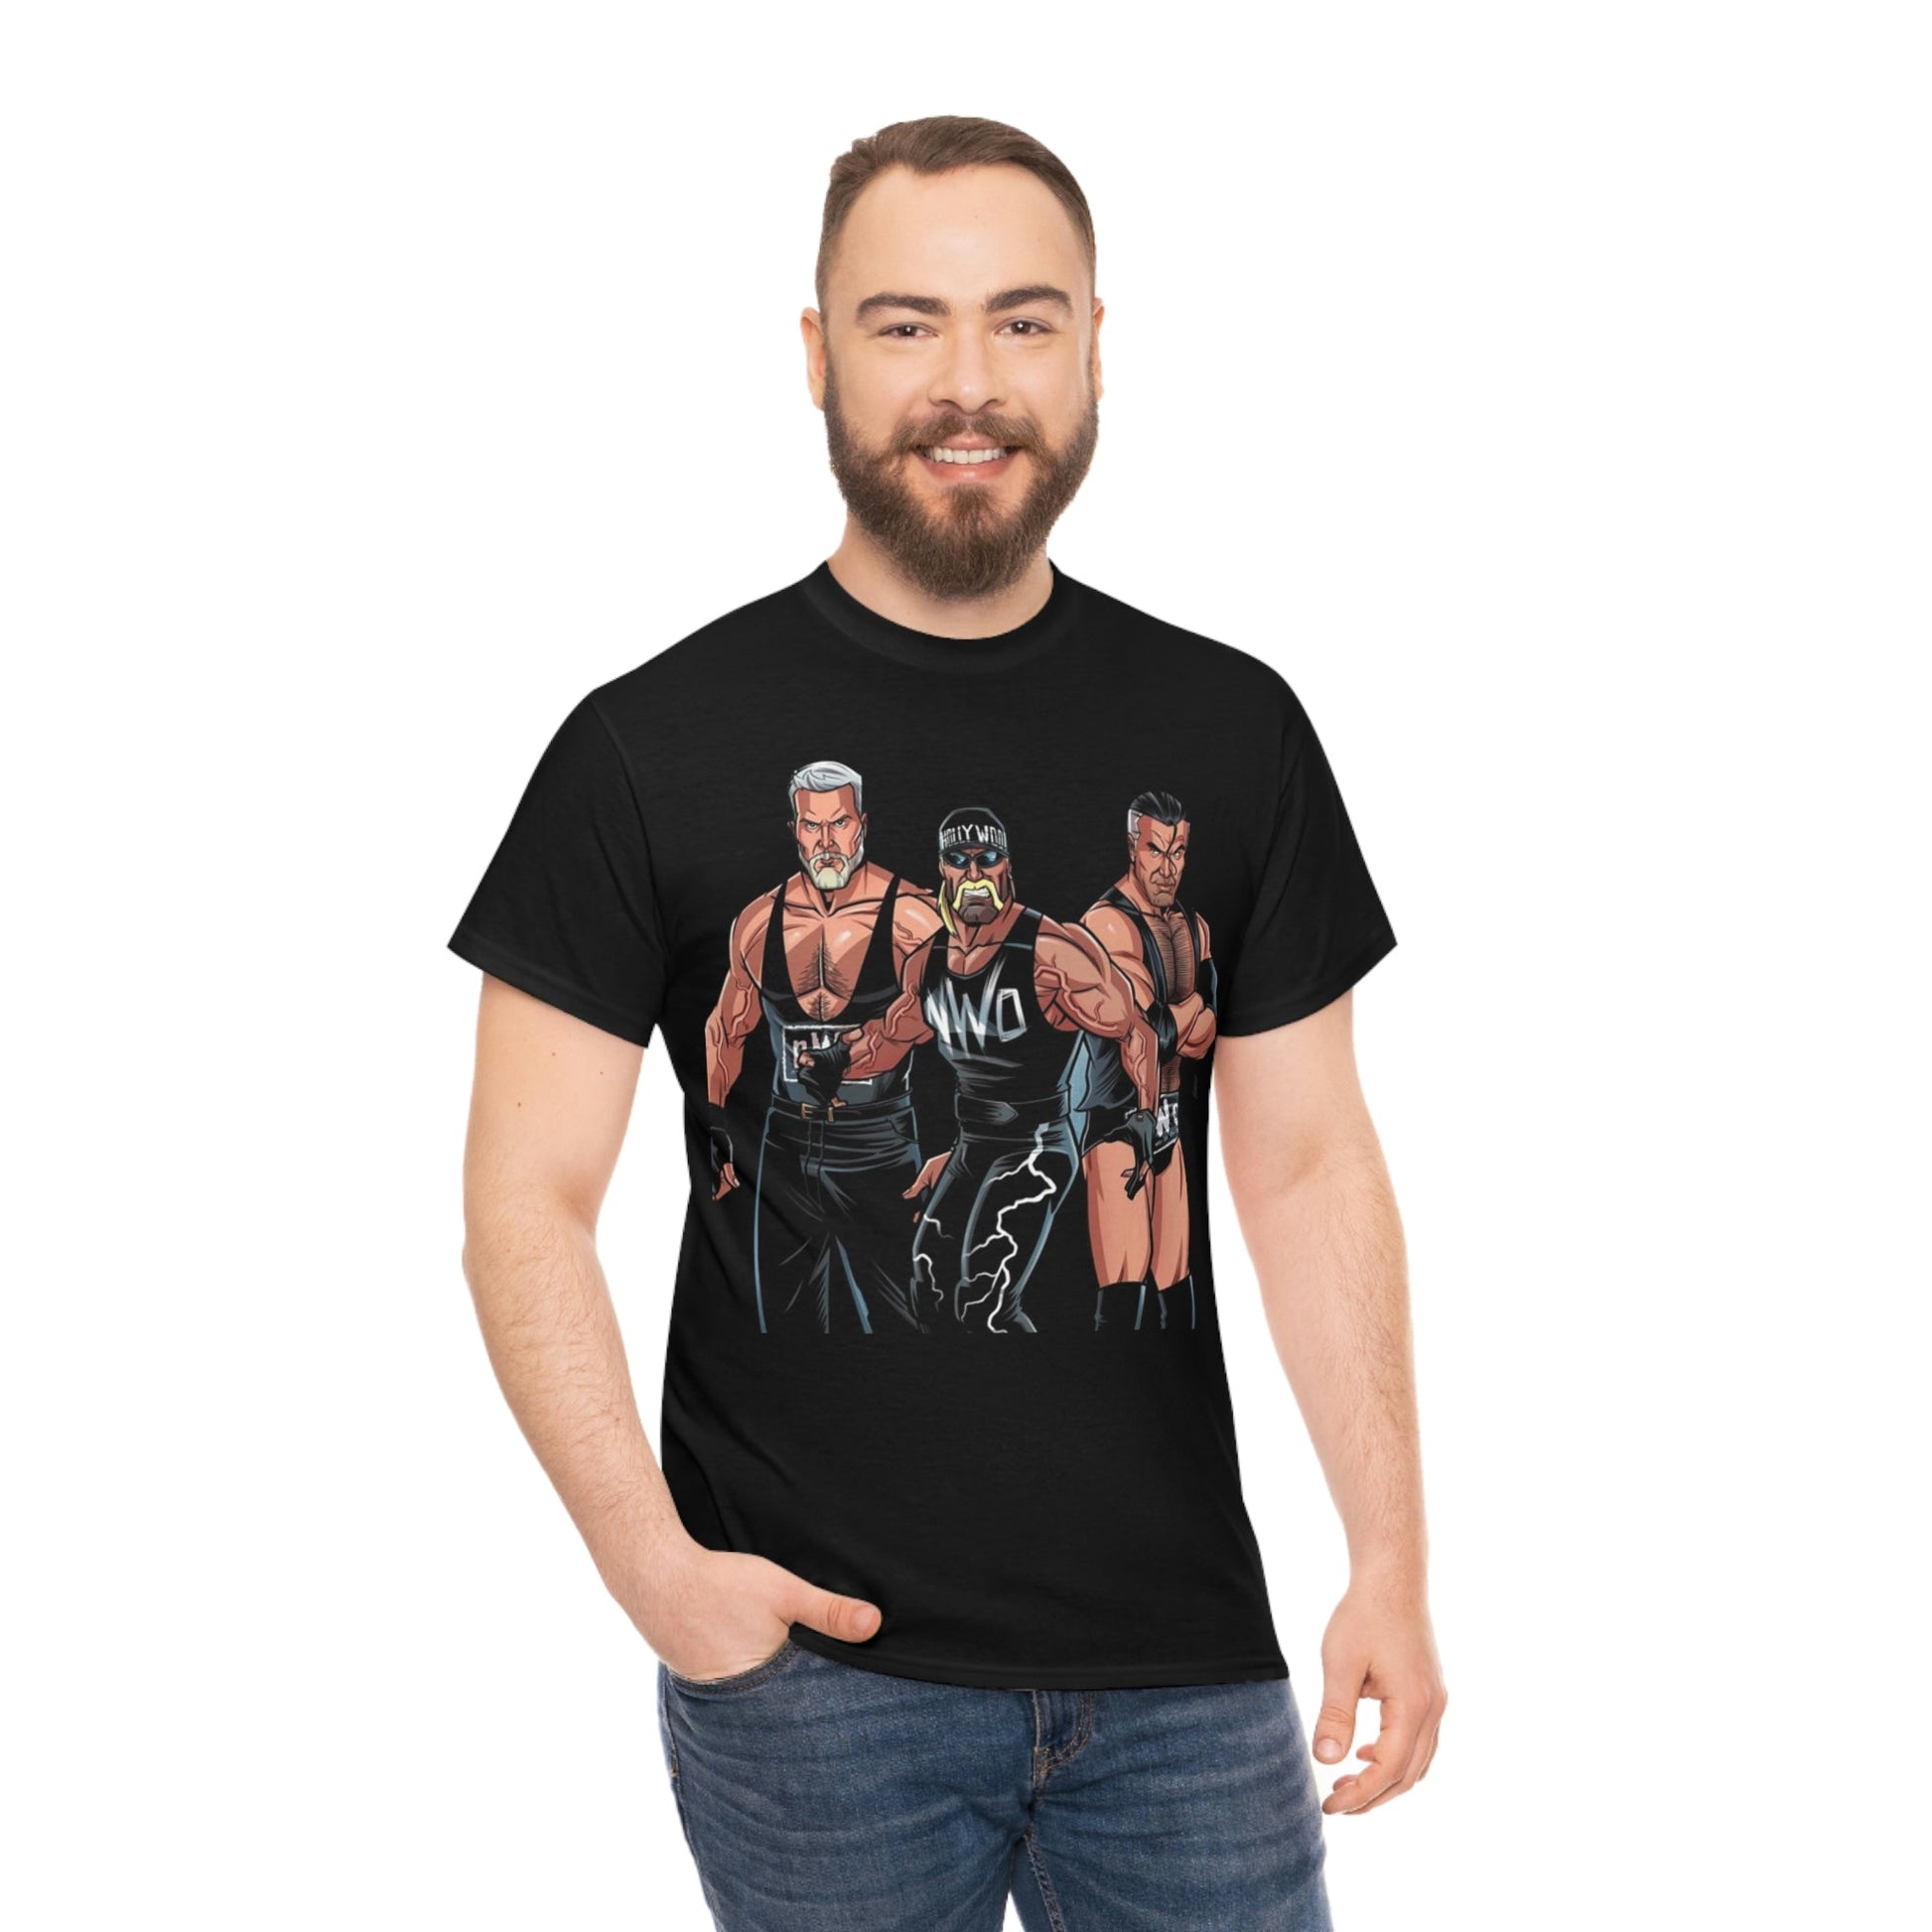 NWO Black And White Founders T-Shirt - RetroTeeShop